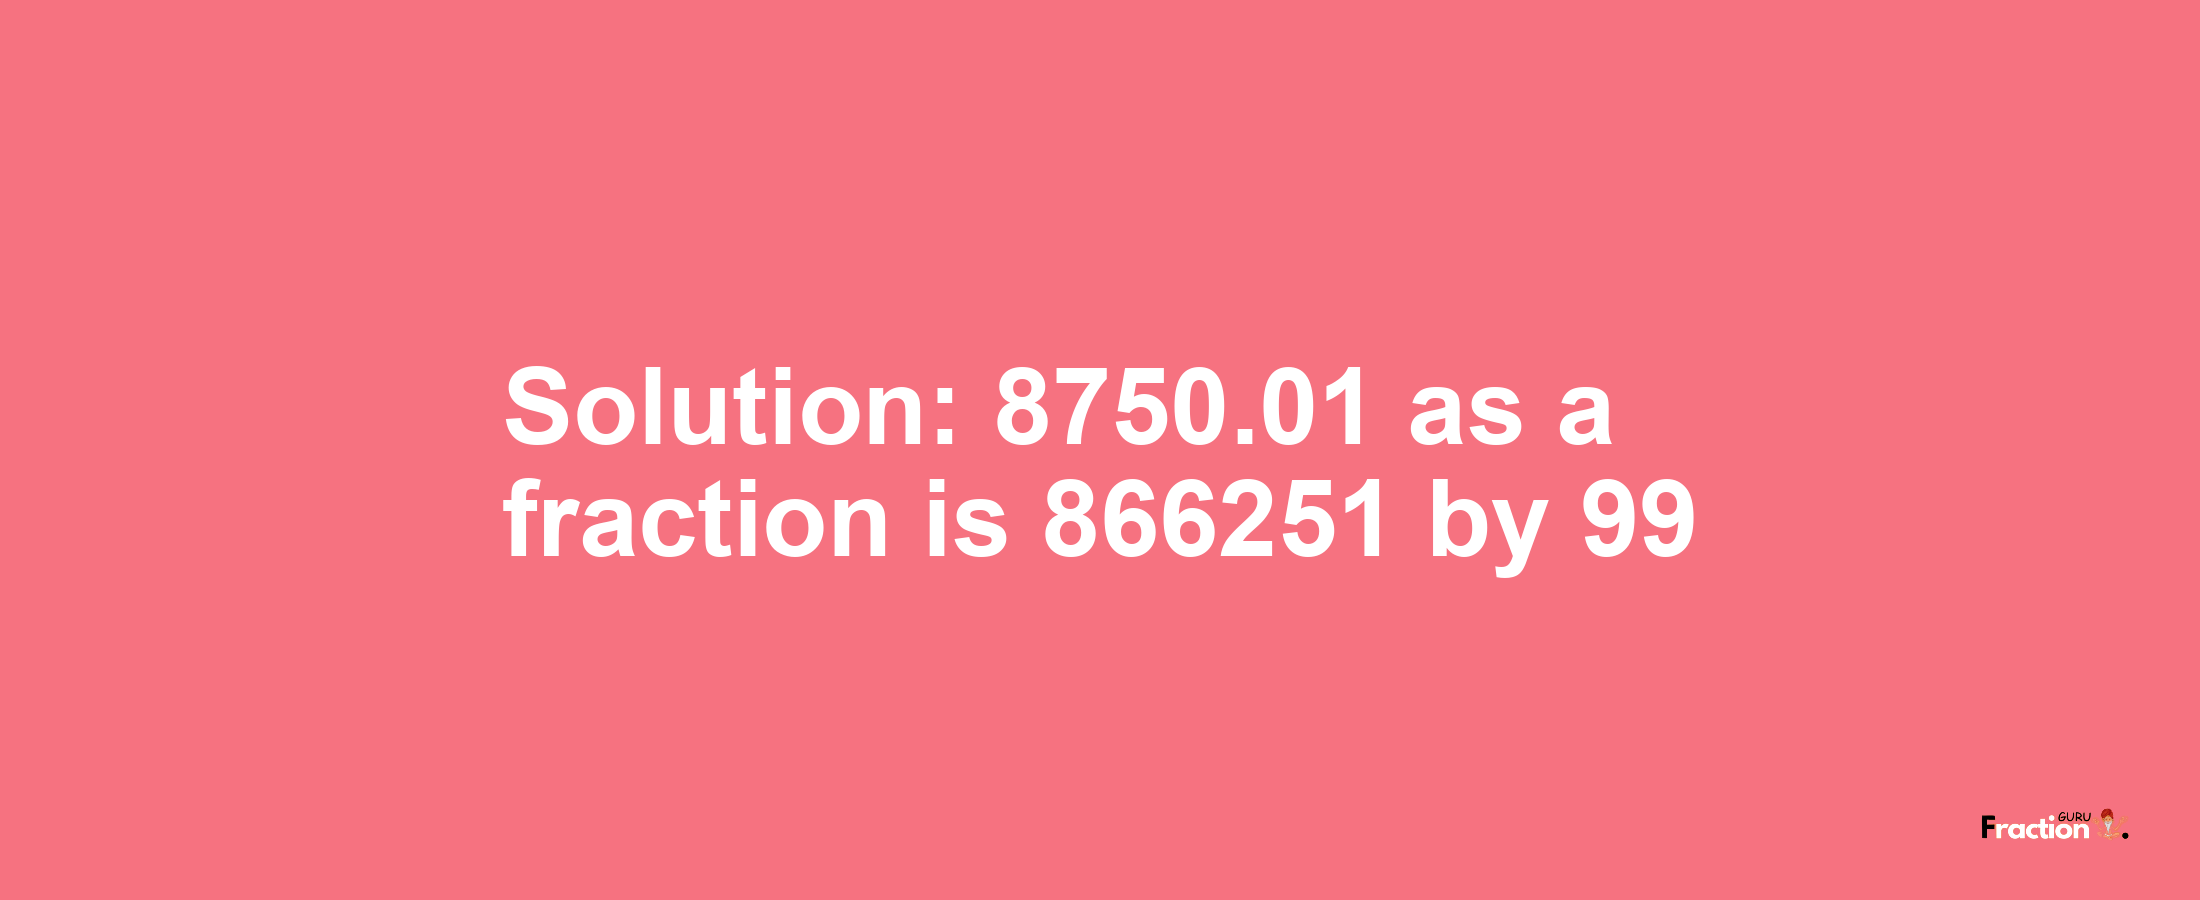 Solution:8750.01 as a fraction is 866251/99